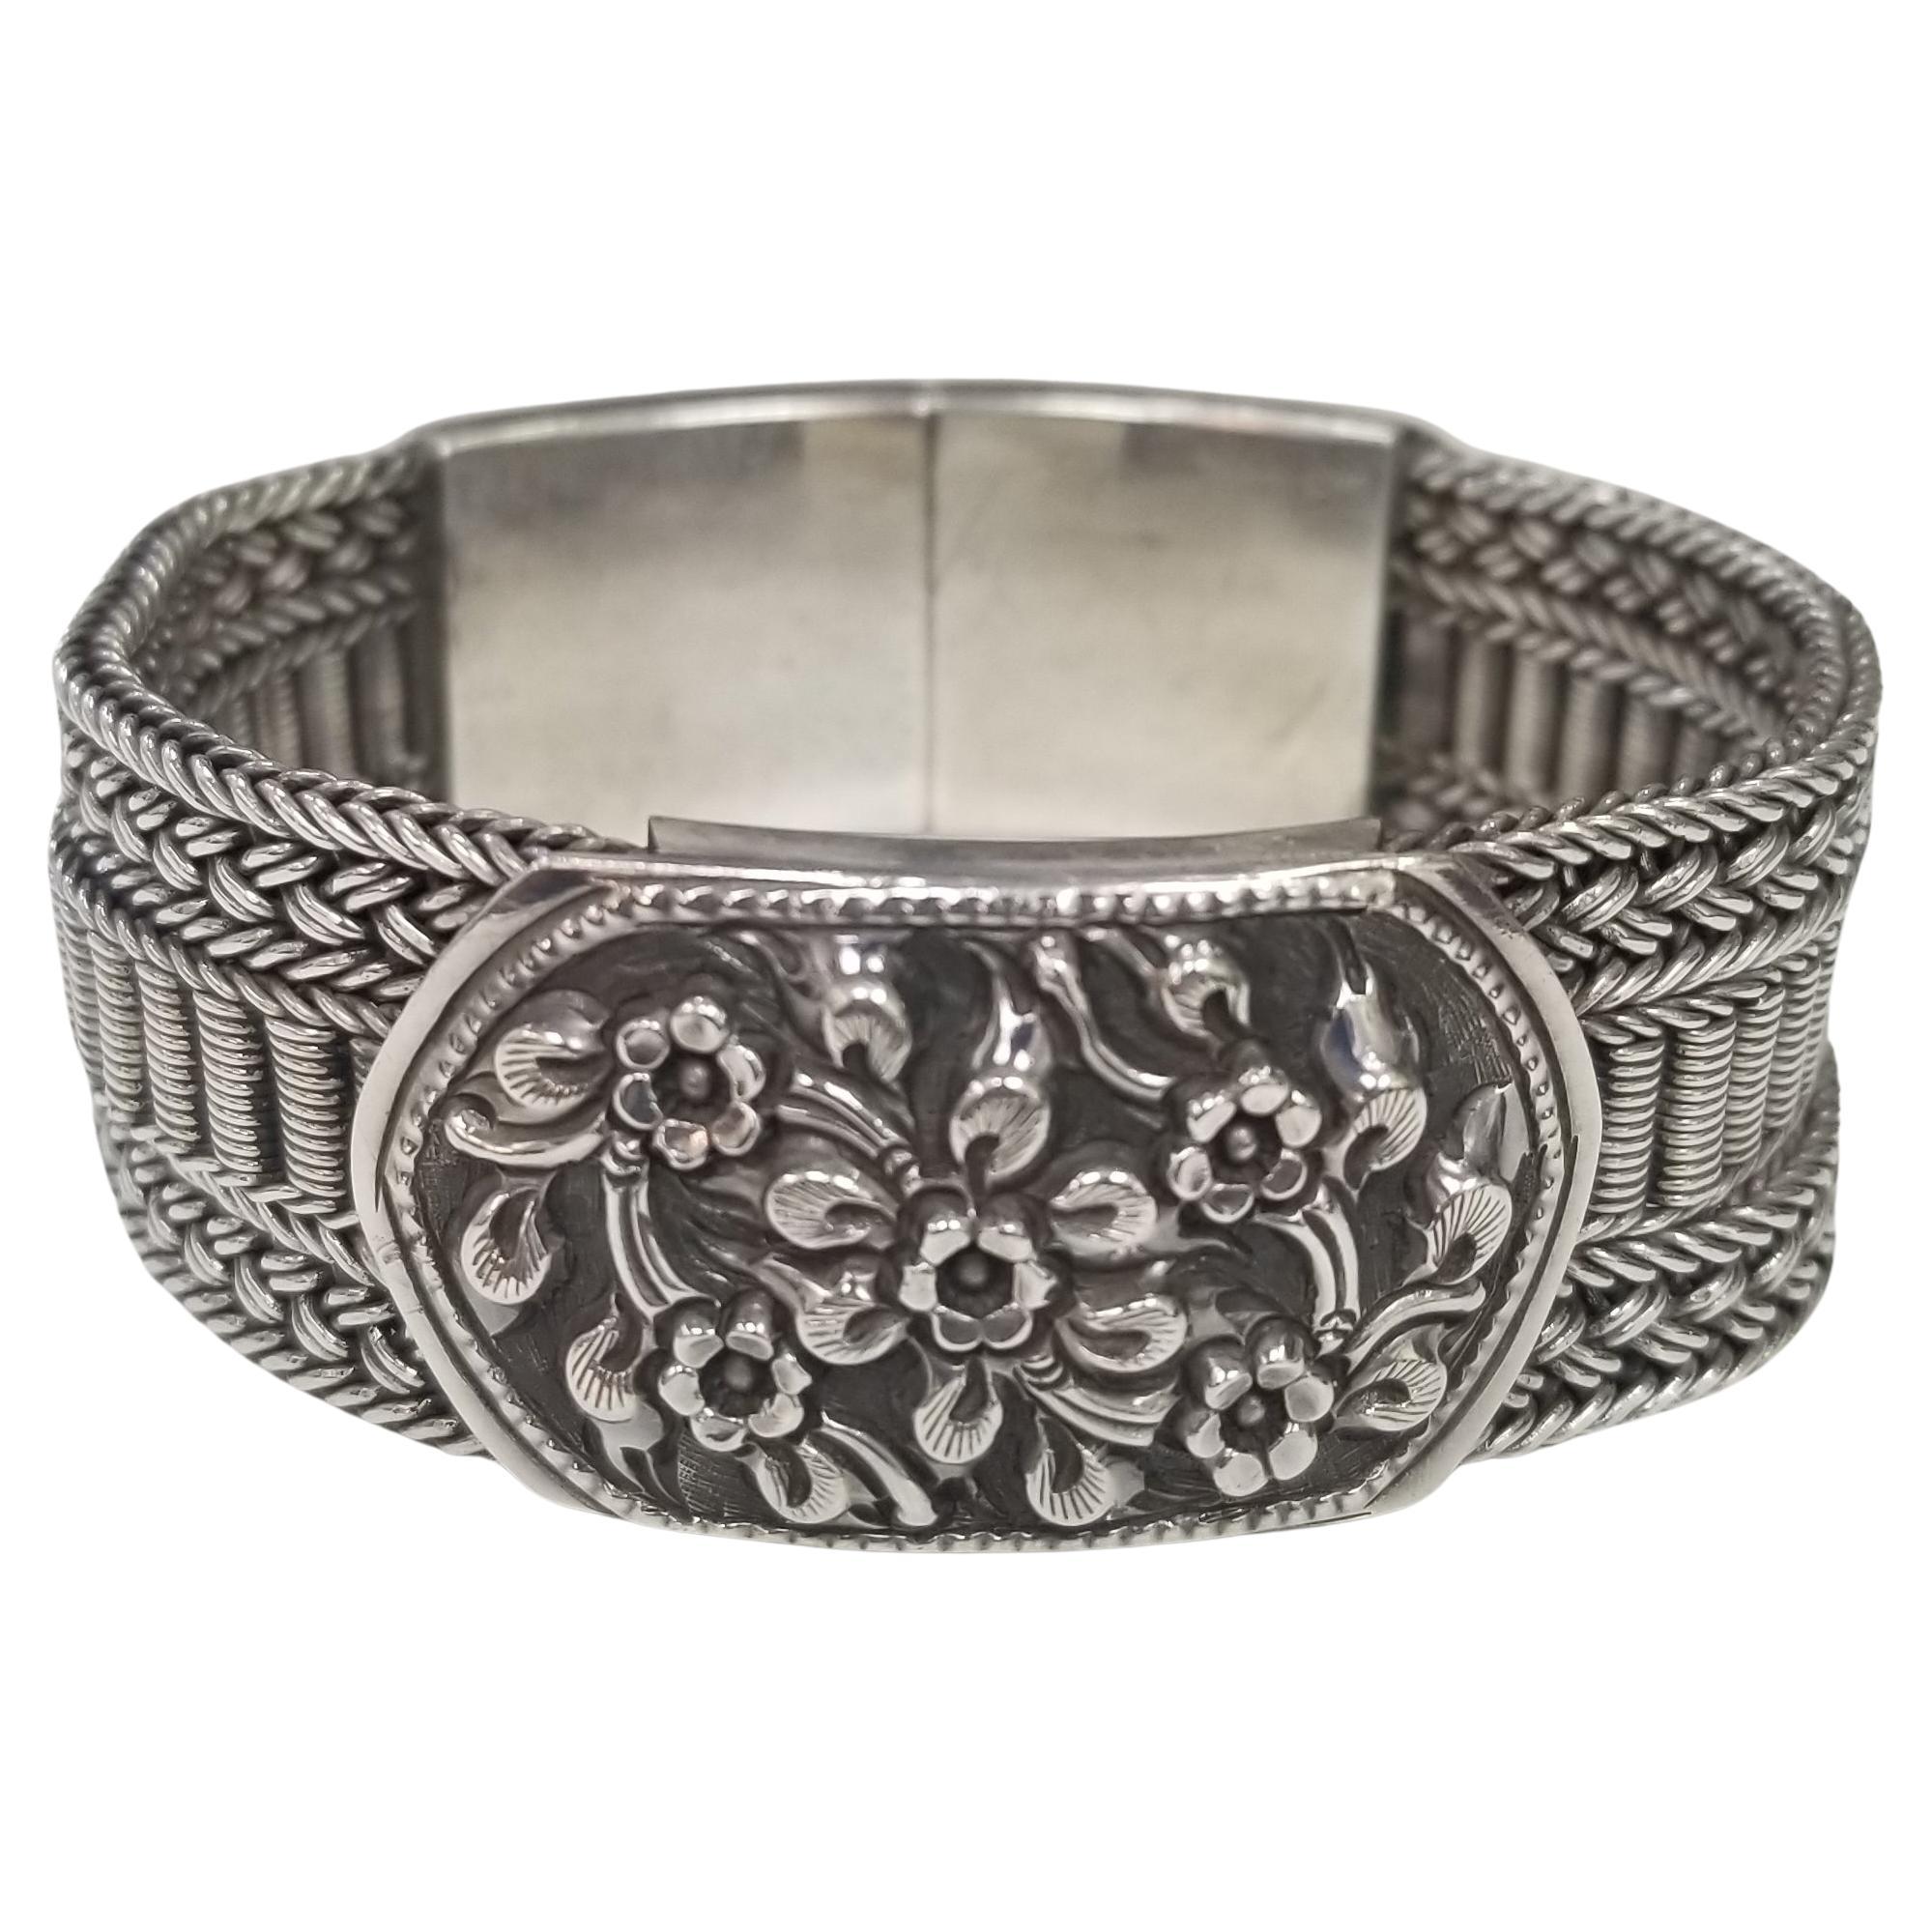 Silver 3 row mesh bracelet with flower motif center and on clasp